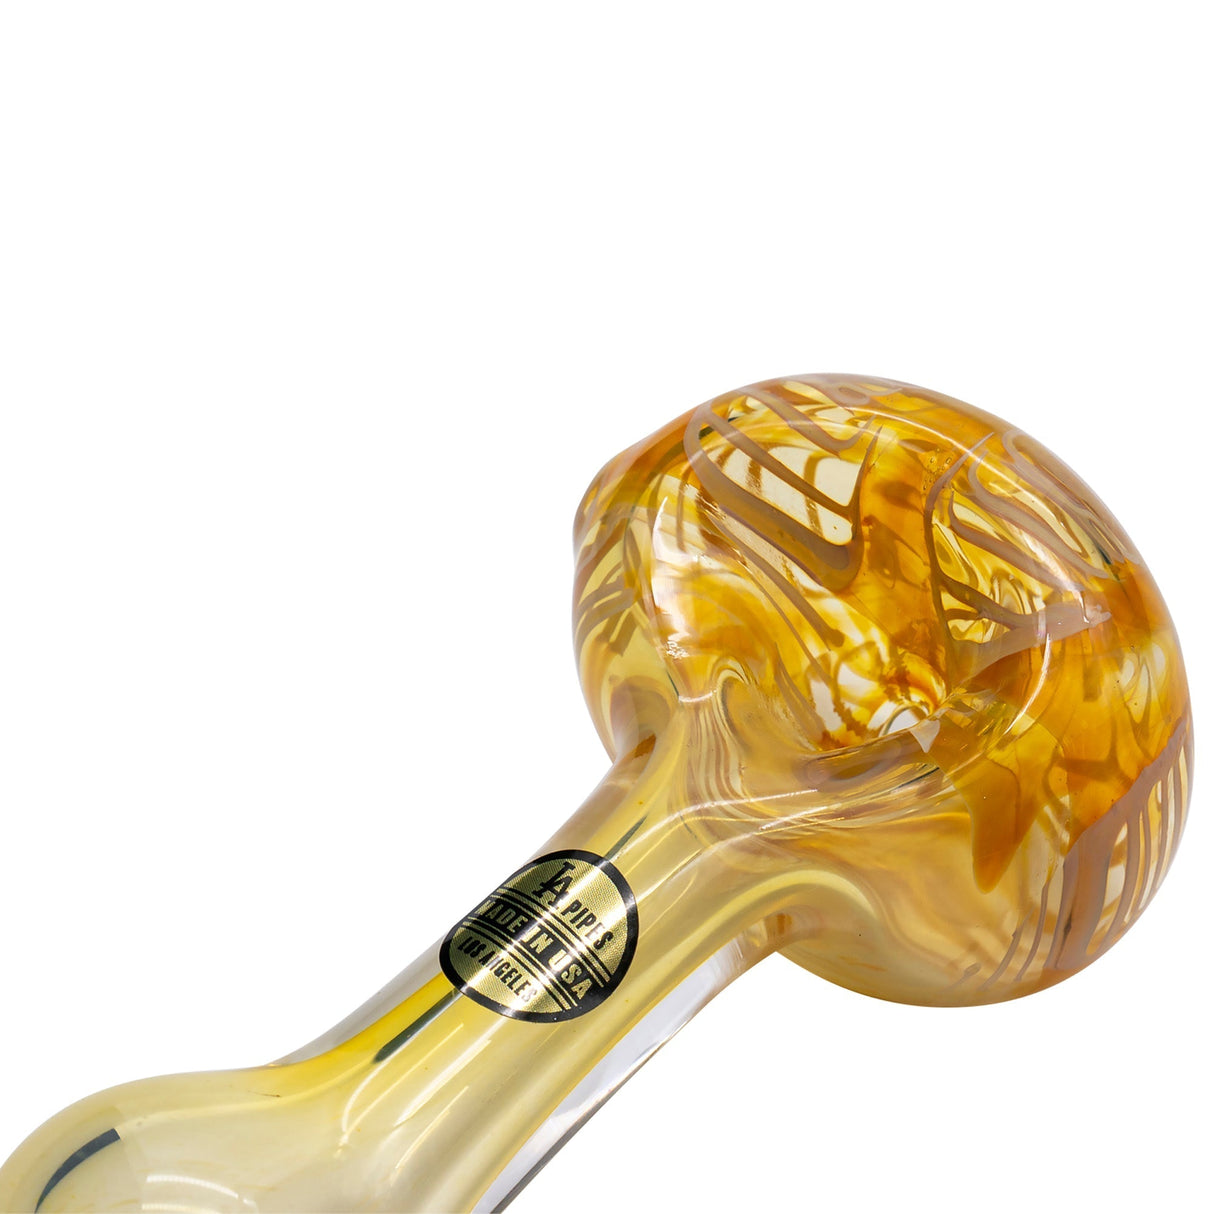 LA Pipes Color Changing Spoon Hand-Pipe with Yellow Accents, Side View